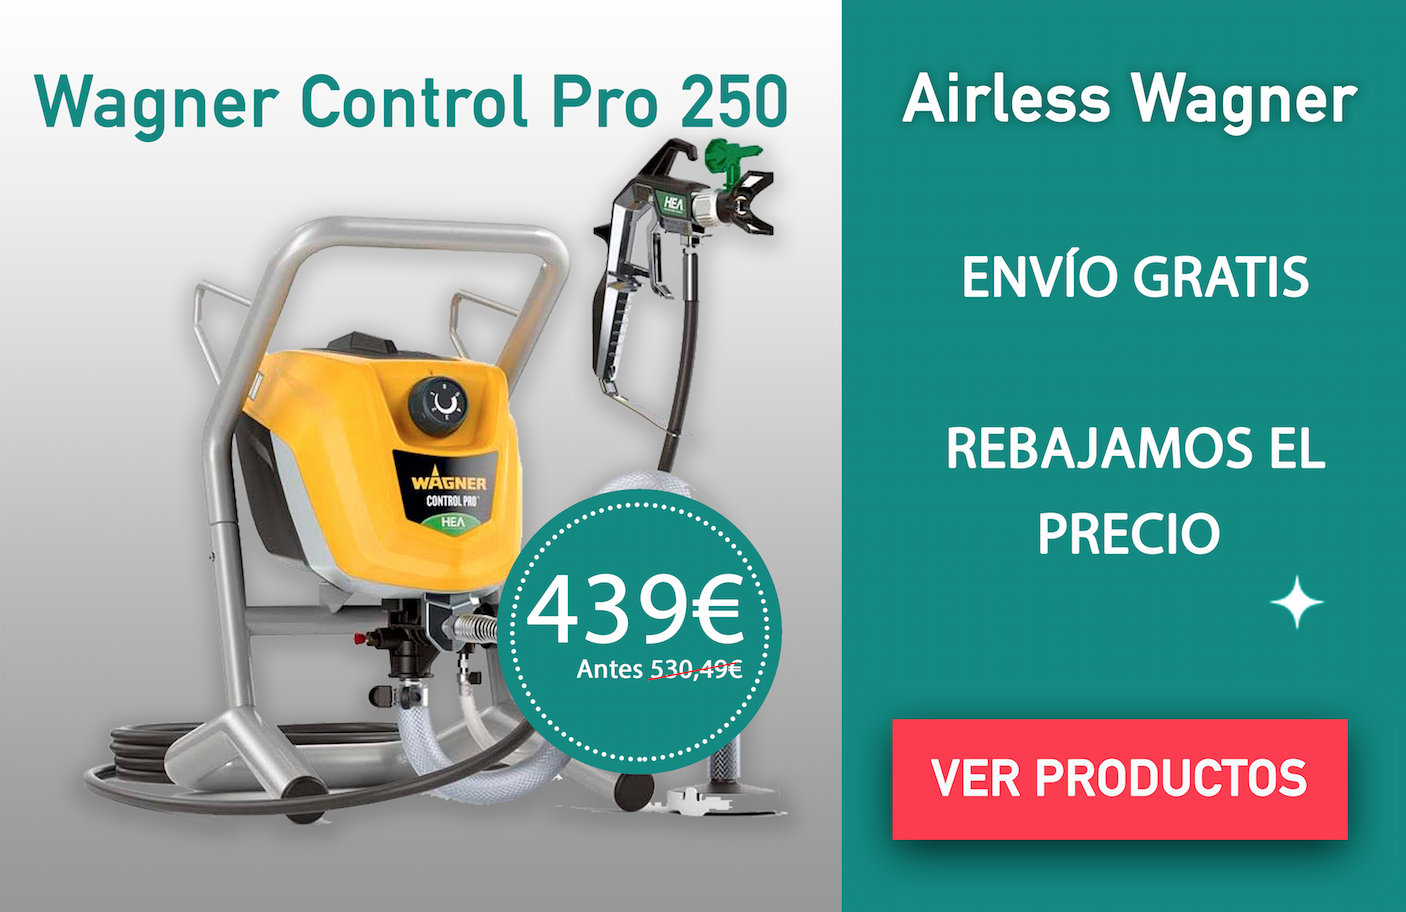 Airless control pro 250